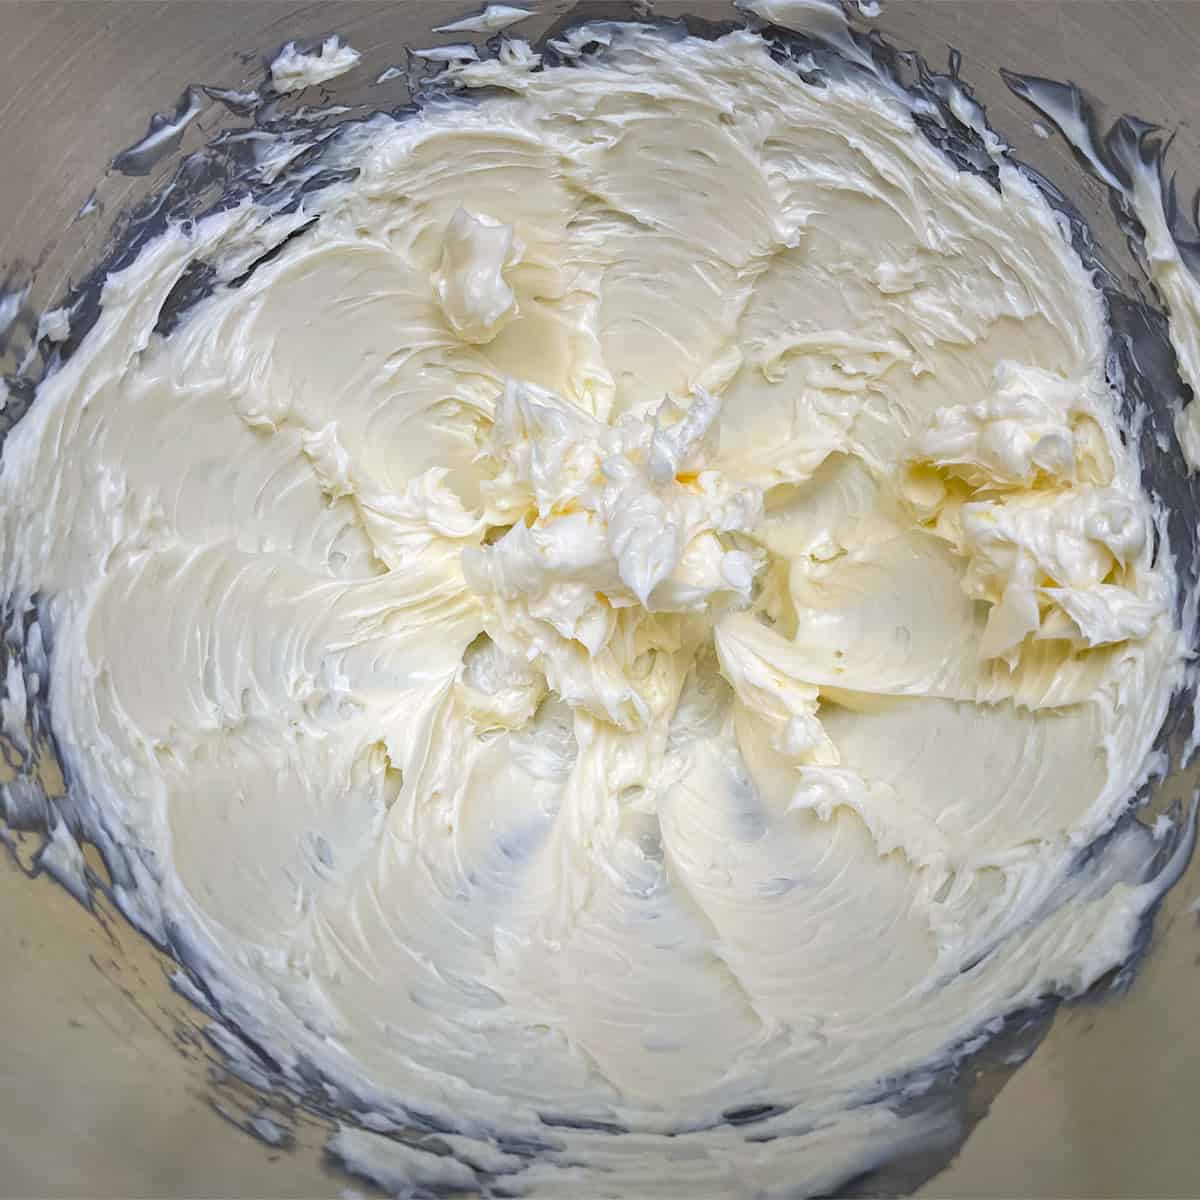 Butter that has been creamed in a mixer bowl.